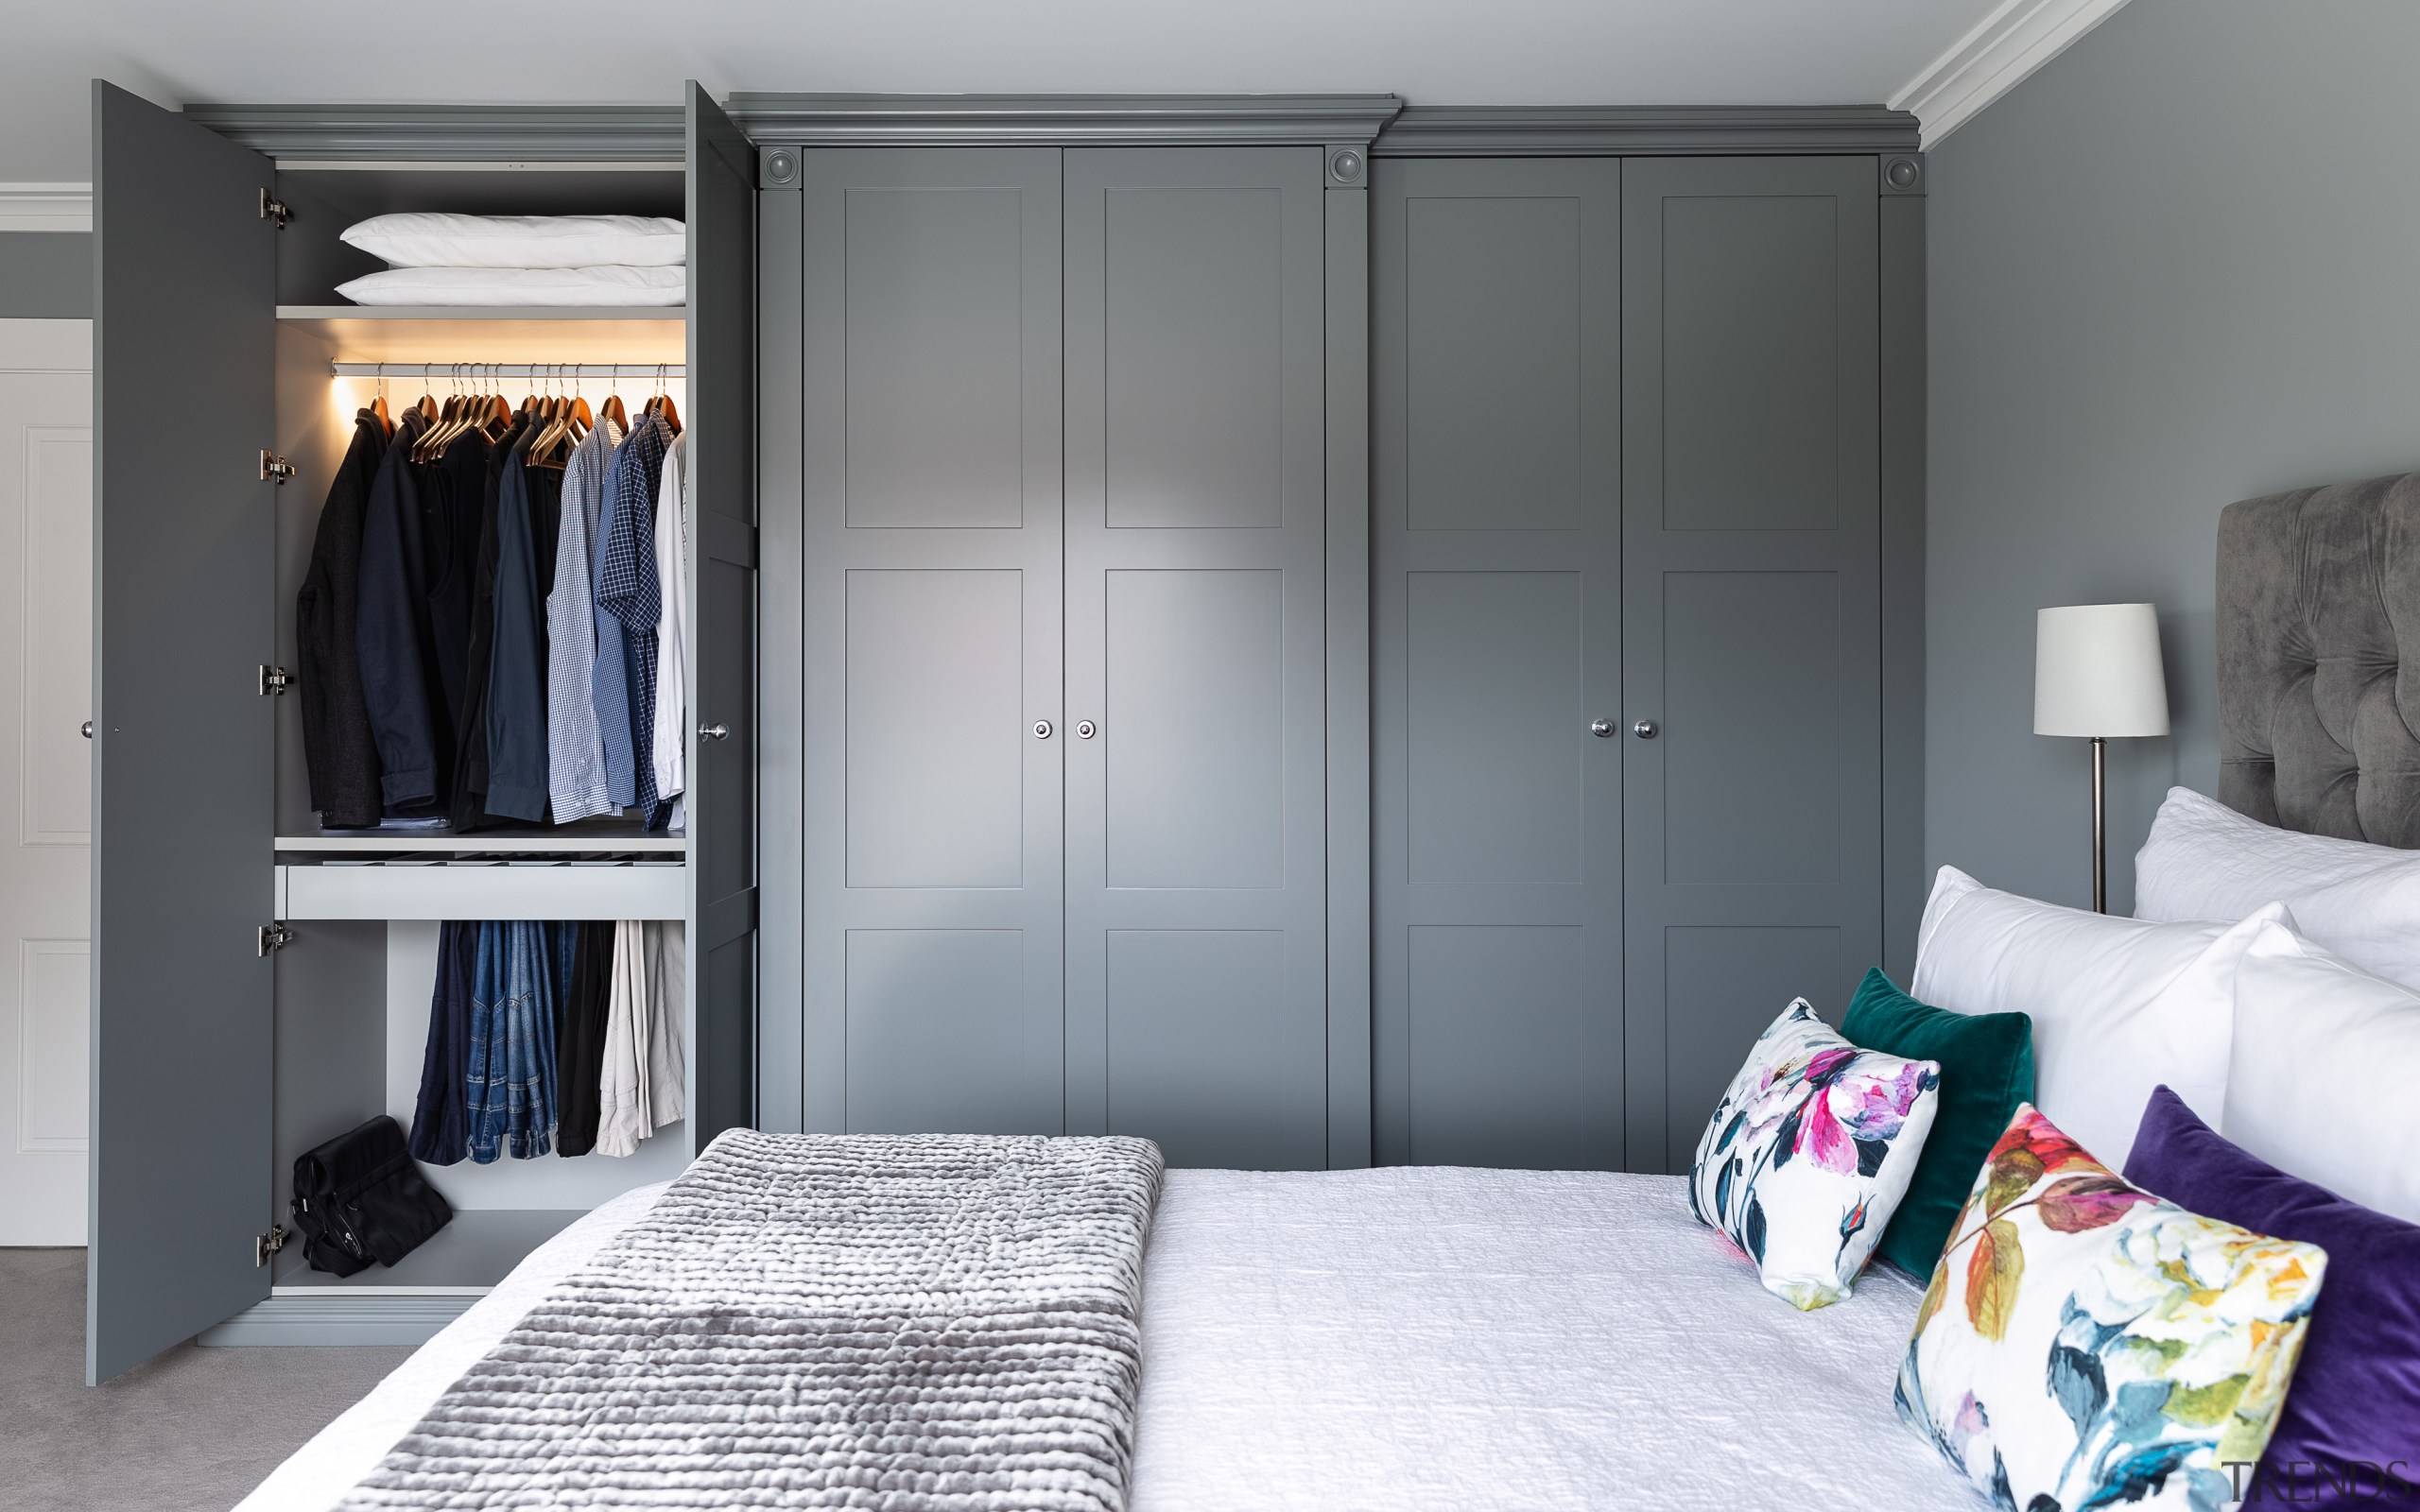 The bedroom wardrobes may look uniform, but they 